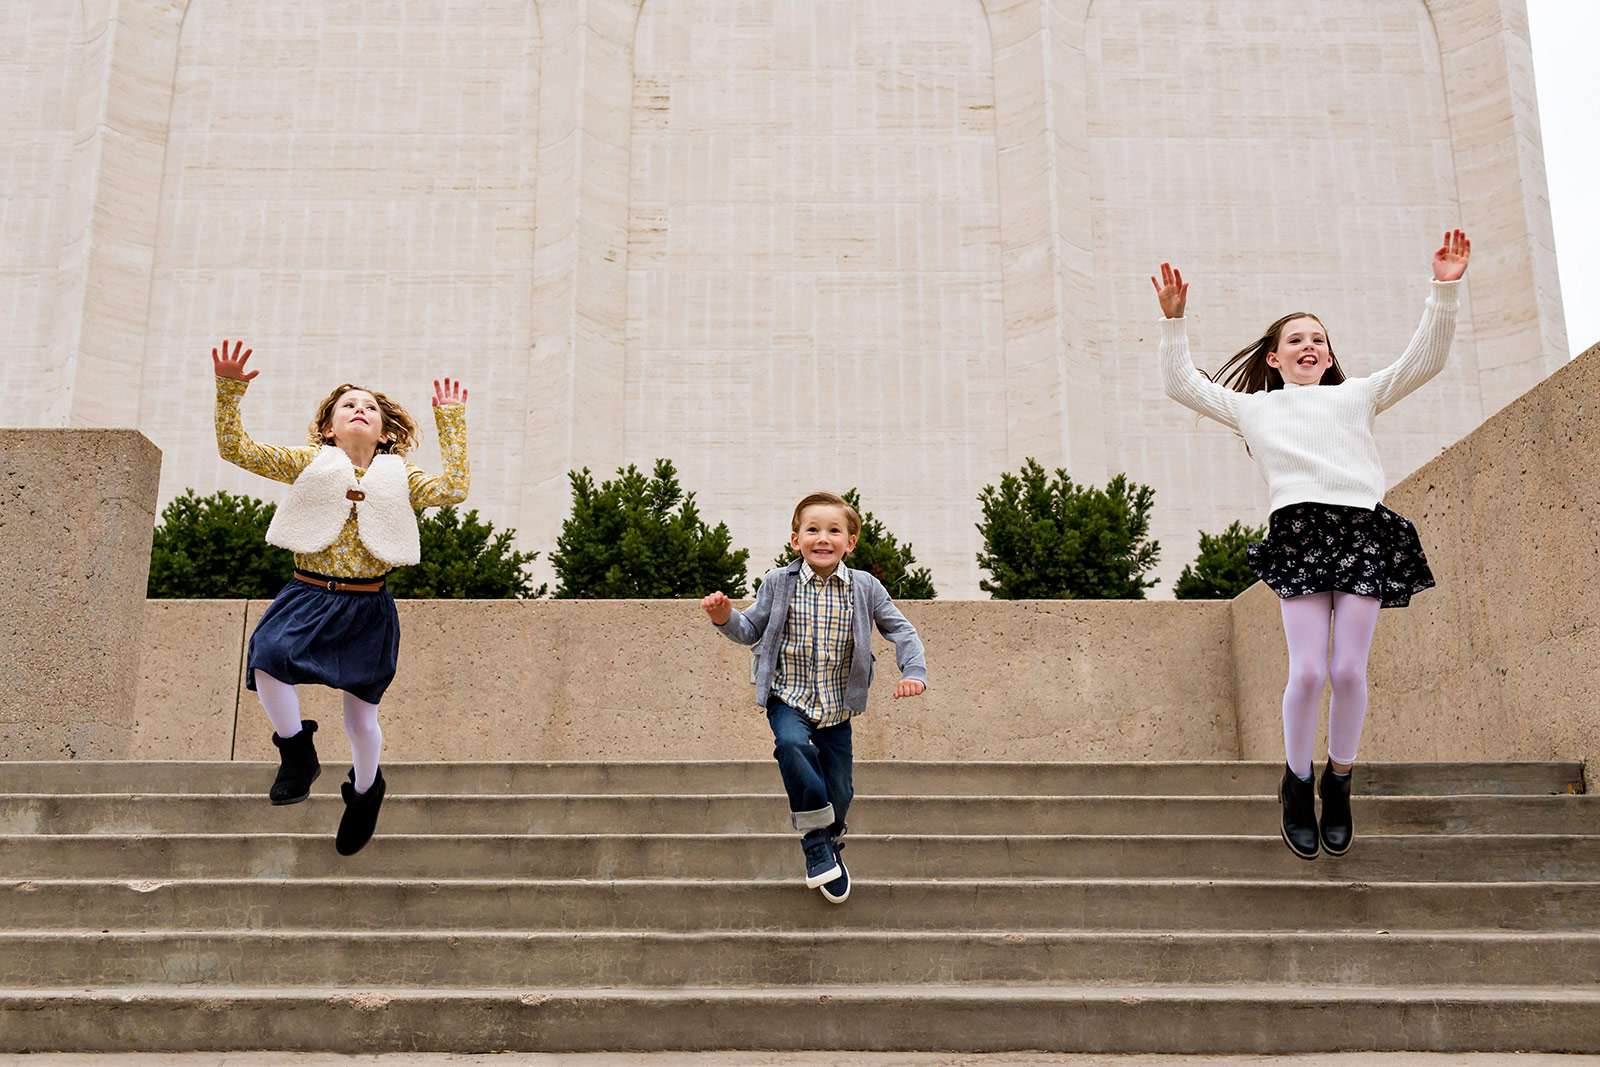 Nora, Ben and Harper are caught jumping in mid-air from a set of steps.